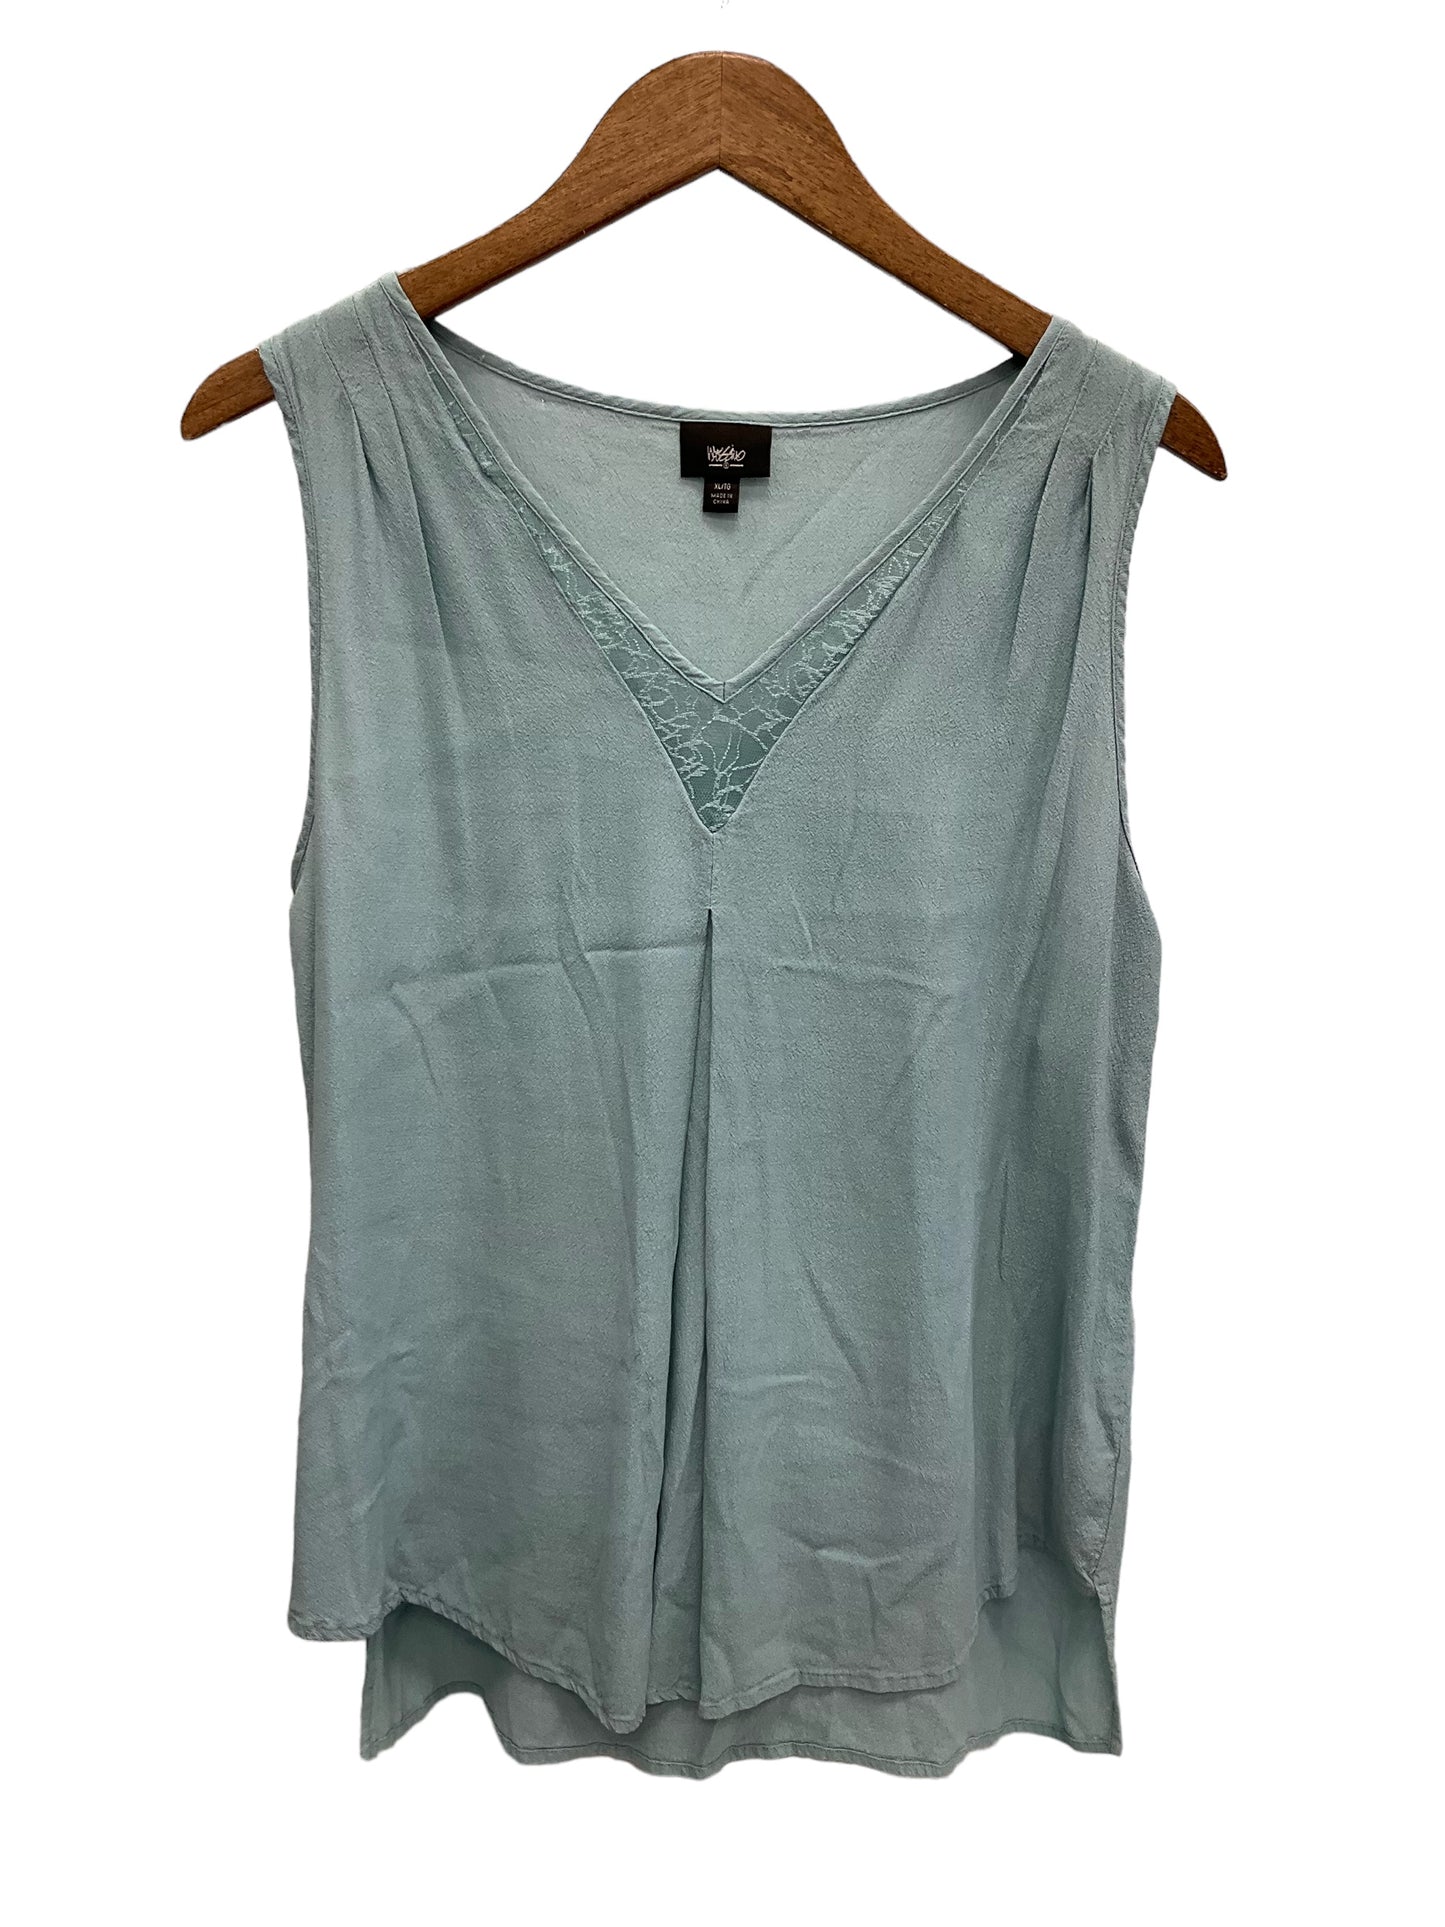 Top Sleeveless By Mossimo  Size: Xl